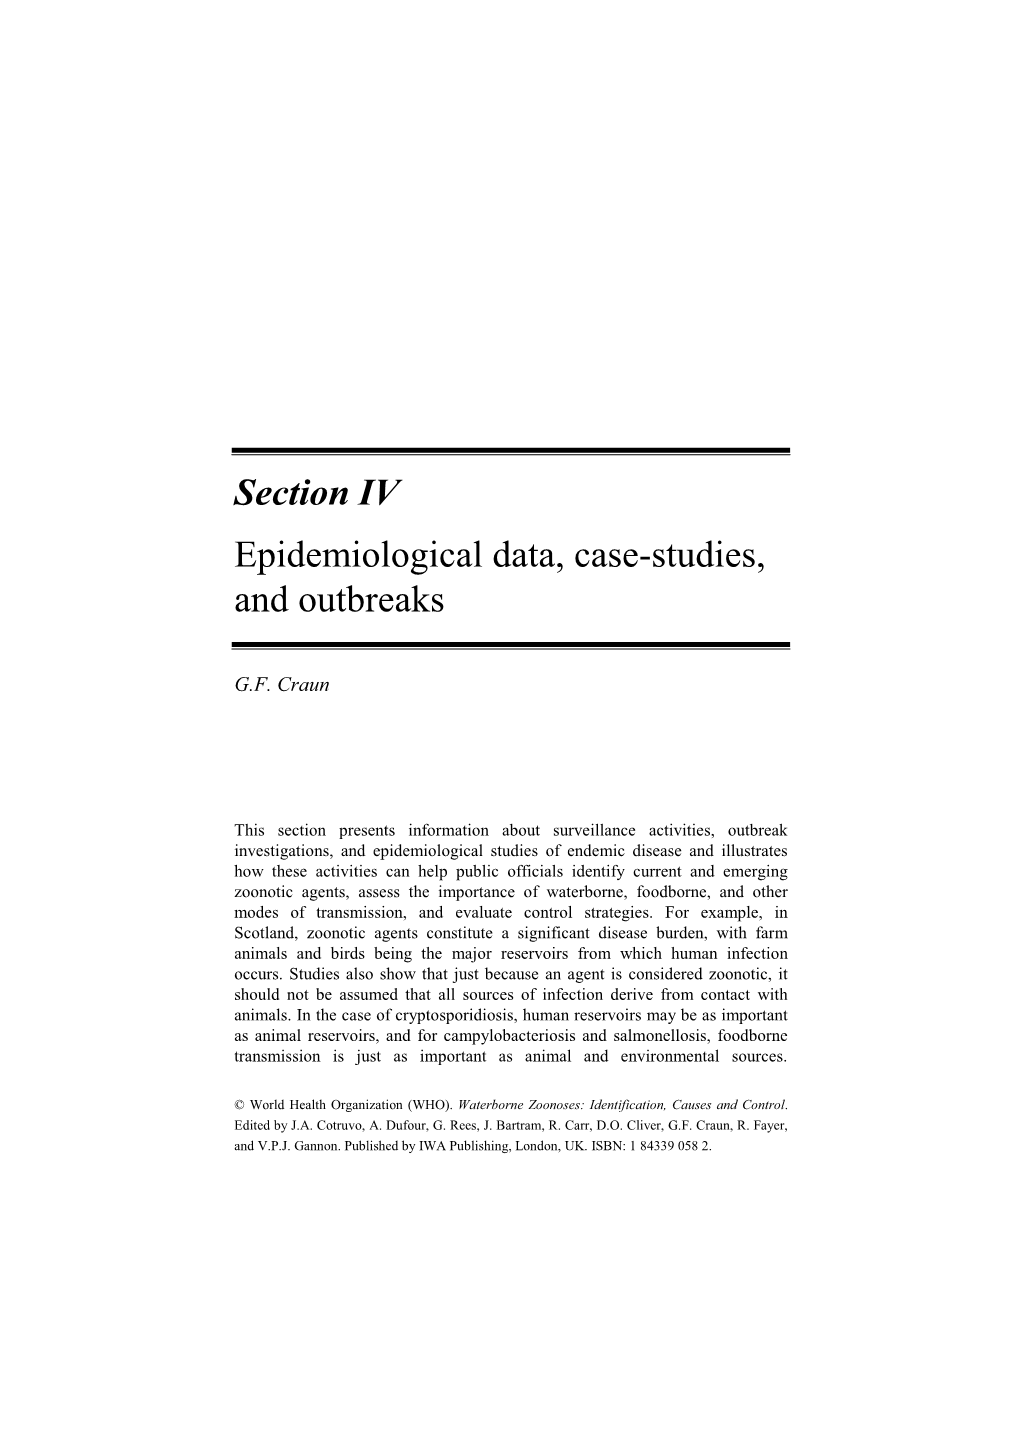 Section IV Epidemiological Data, Case-Studies, and Outbreaks